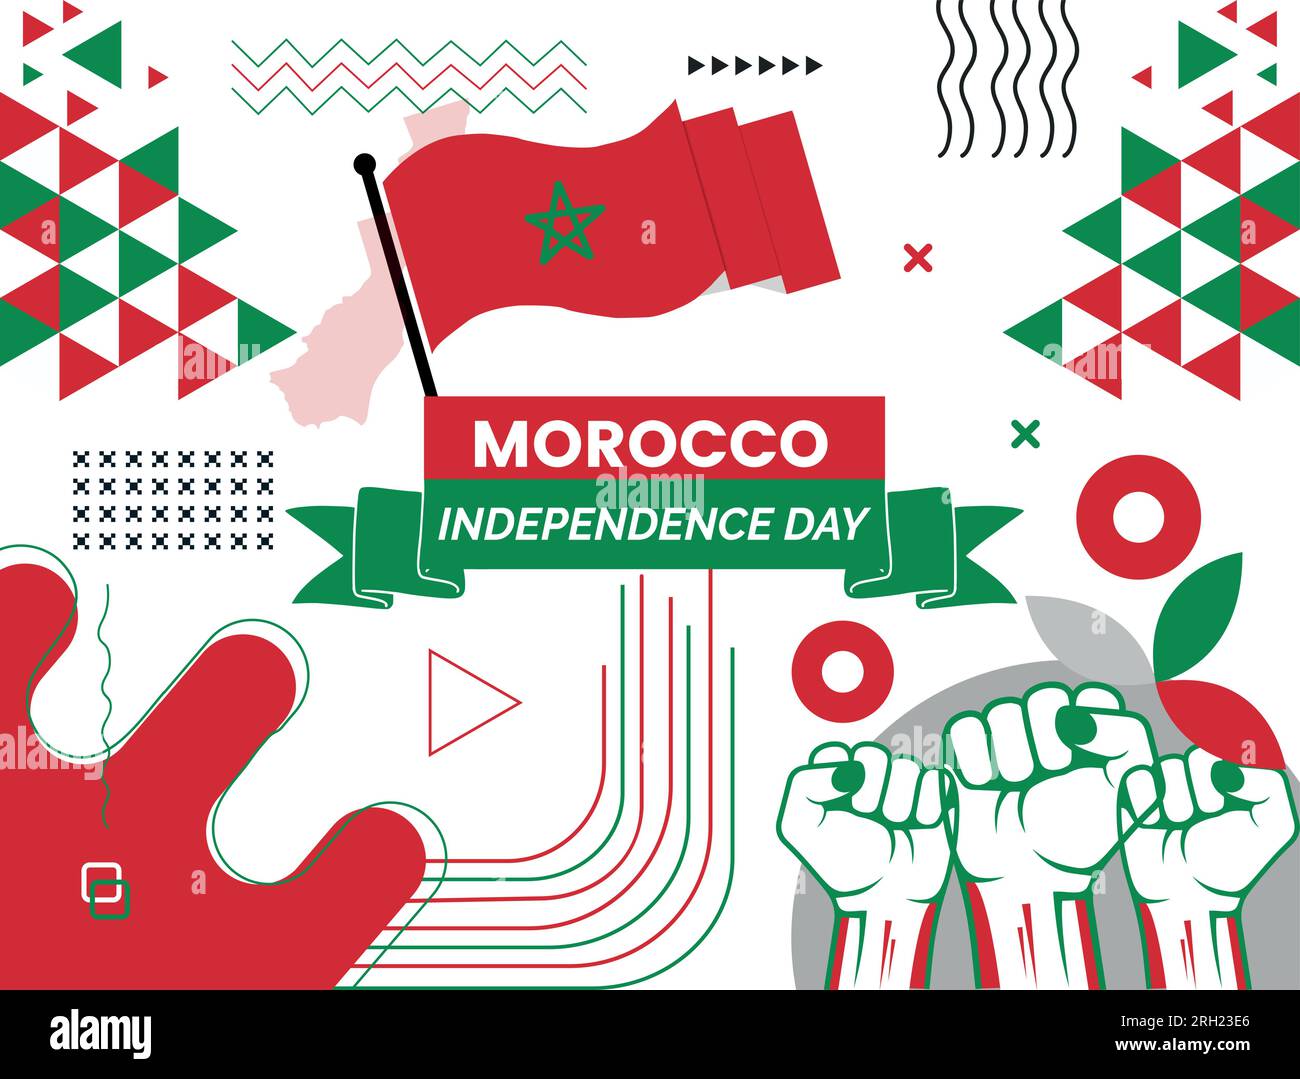 MOROCCO Map and raised fists. National day or Independence day design for MOROCCO celebration. Modern retro design with abstract icons. Stock Vector